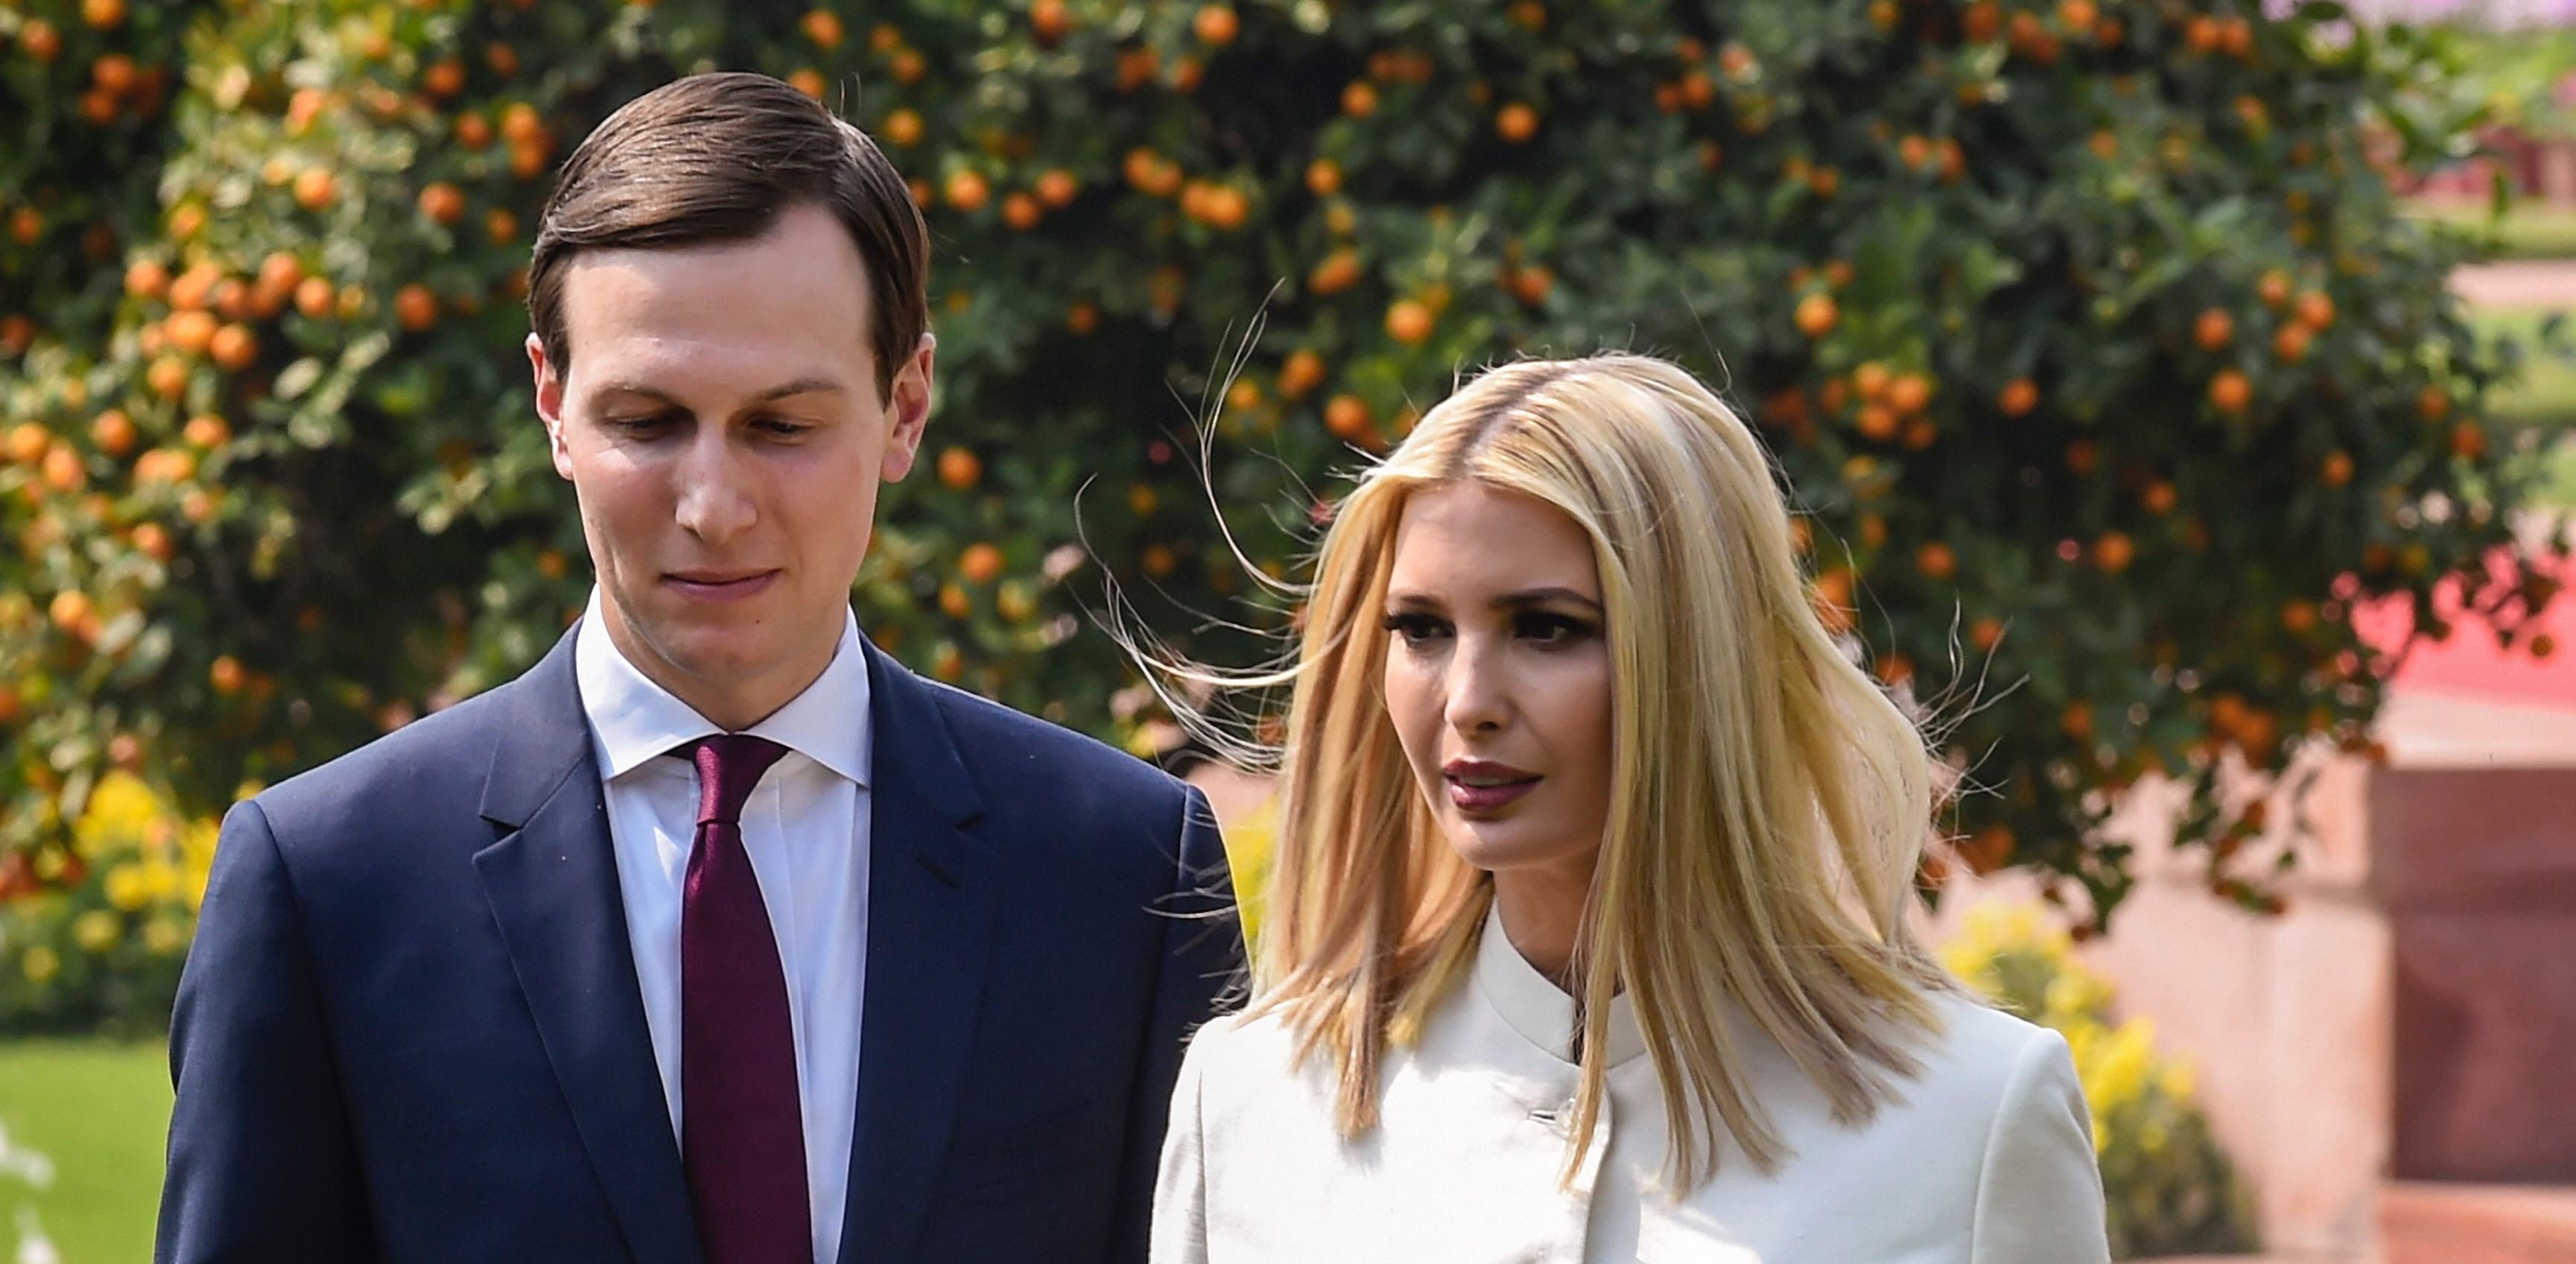 As Manhattan awaits word of the Trump family’s return, the first daughter and her husband appear to be making preparations elsewhere: a Garden State refuge behind guarded gates, perhaps, or Florida, where President Donald Trump is renovating his Mar-a-Lago estate. Credit: PTI